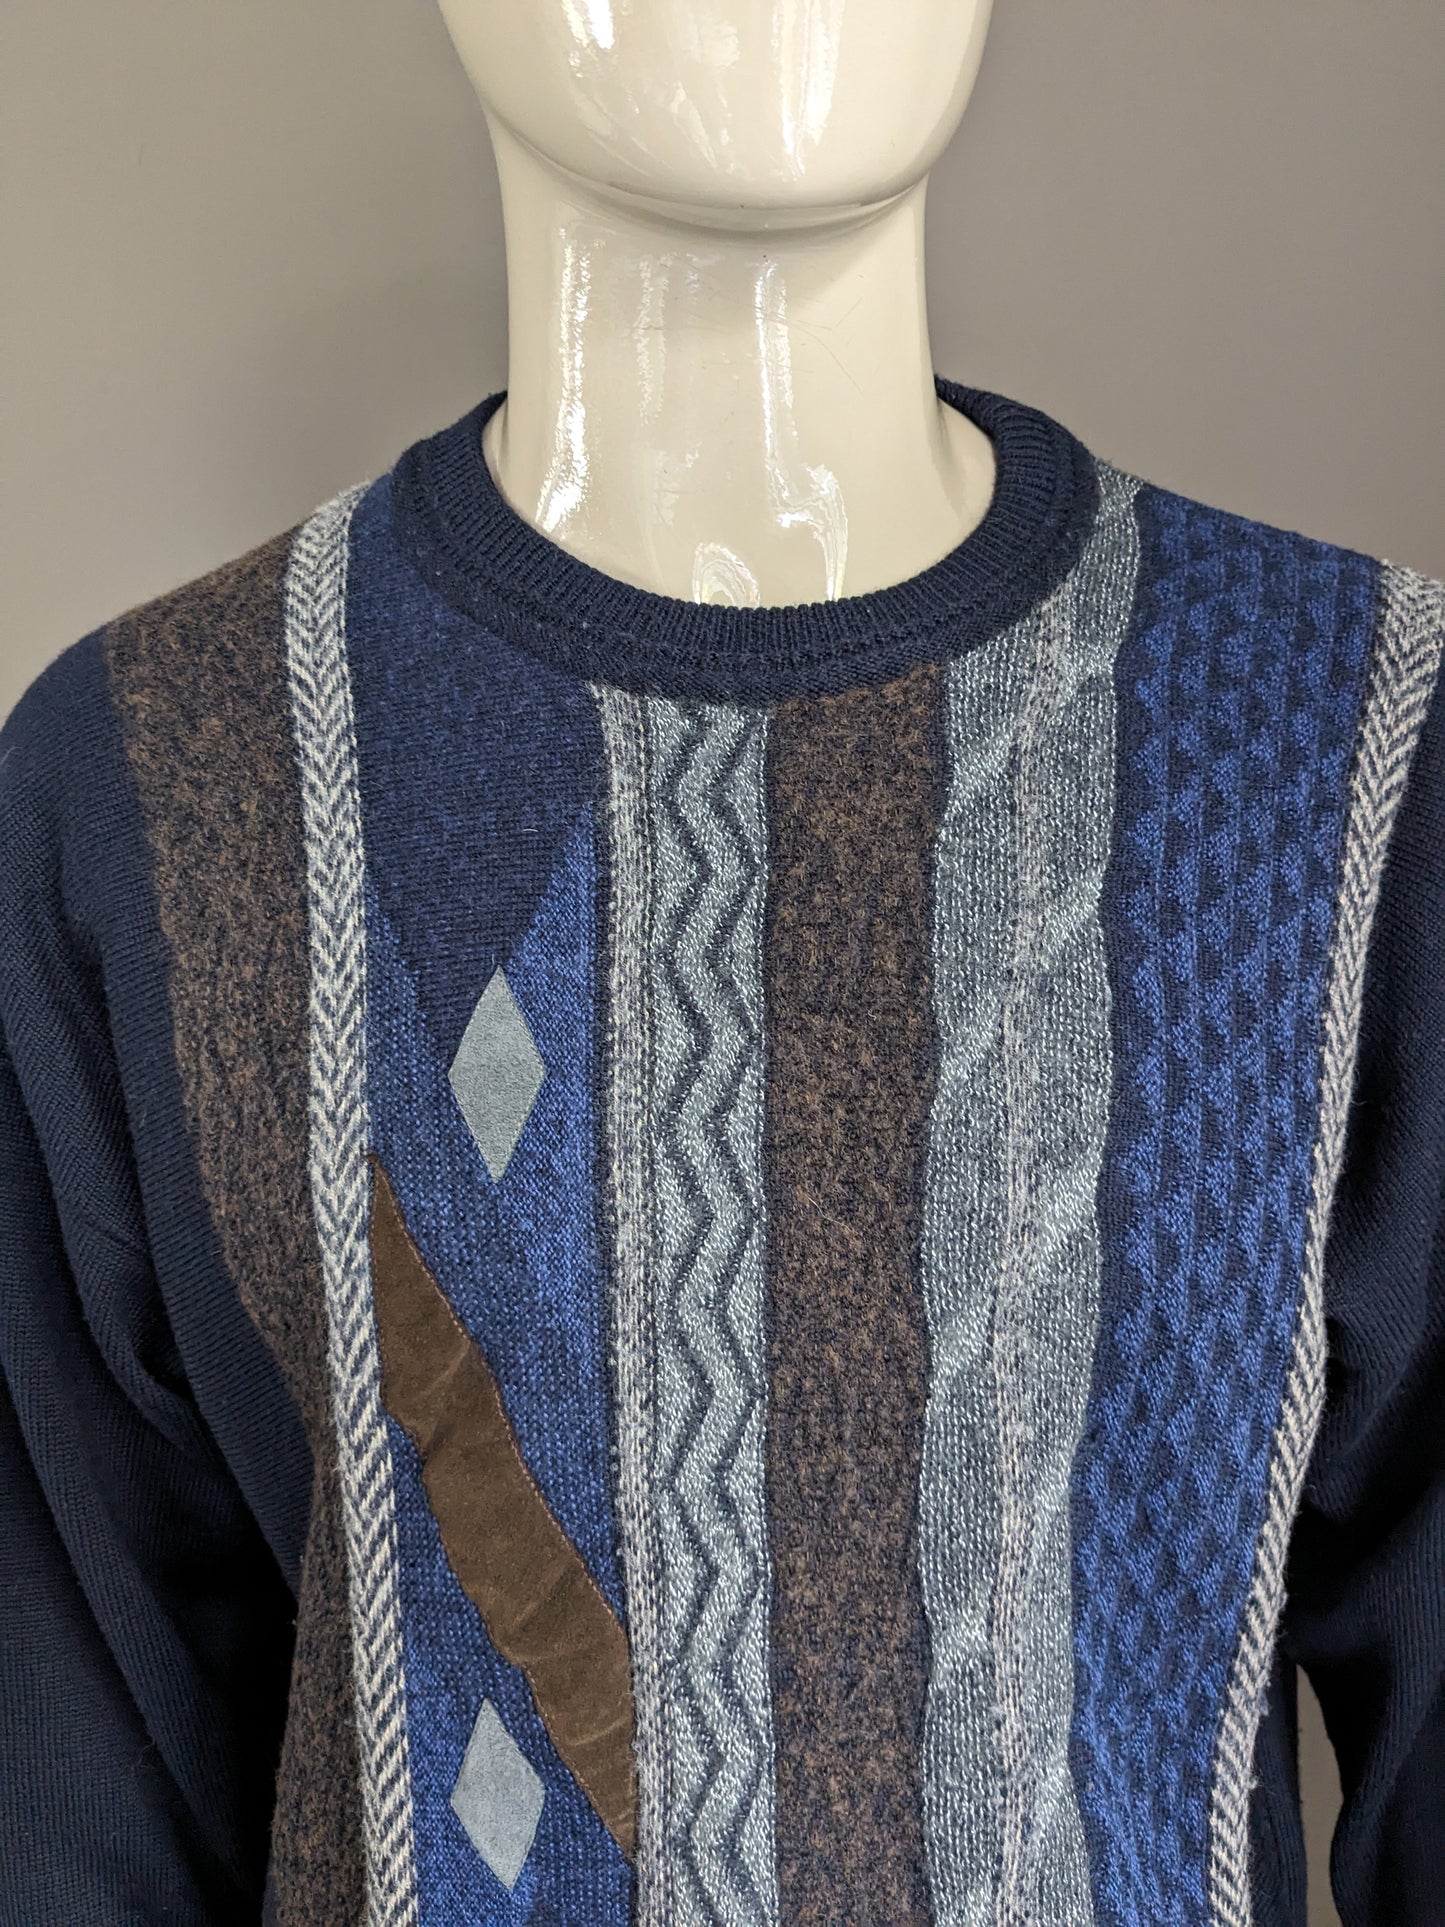 Vintage sweater. Dark blue brown gray colored. Size XL.